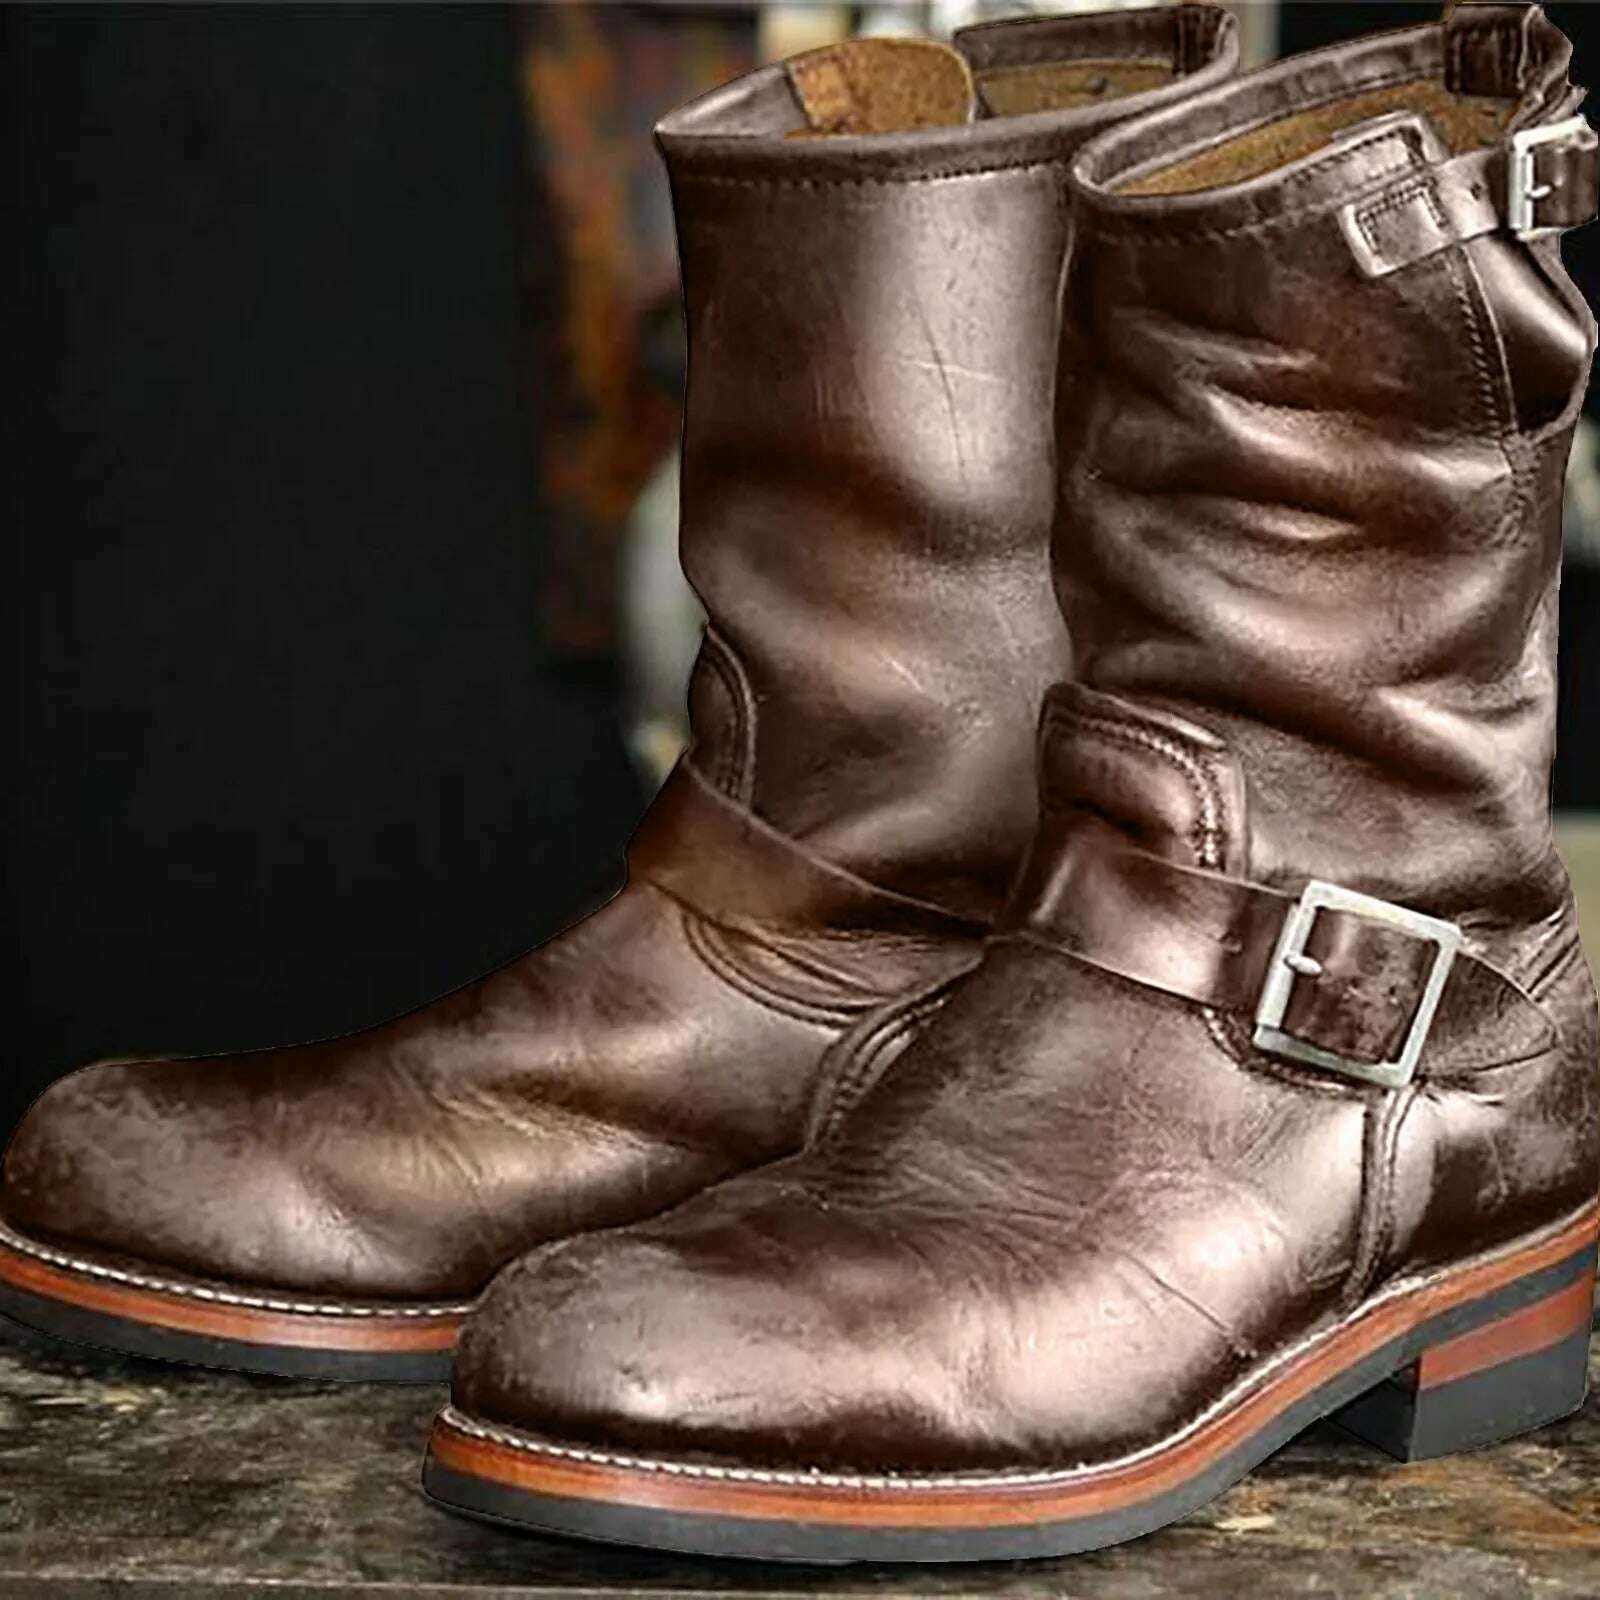 KIMLUD, Men's Vintage Cowboy Boots Leather High Top Chain Buckle Strap Punk Shoes Pointed Toe Biker Boots Men Botas Mujer, Coffee / 40 / United States, KIMLUD Womens Clothes